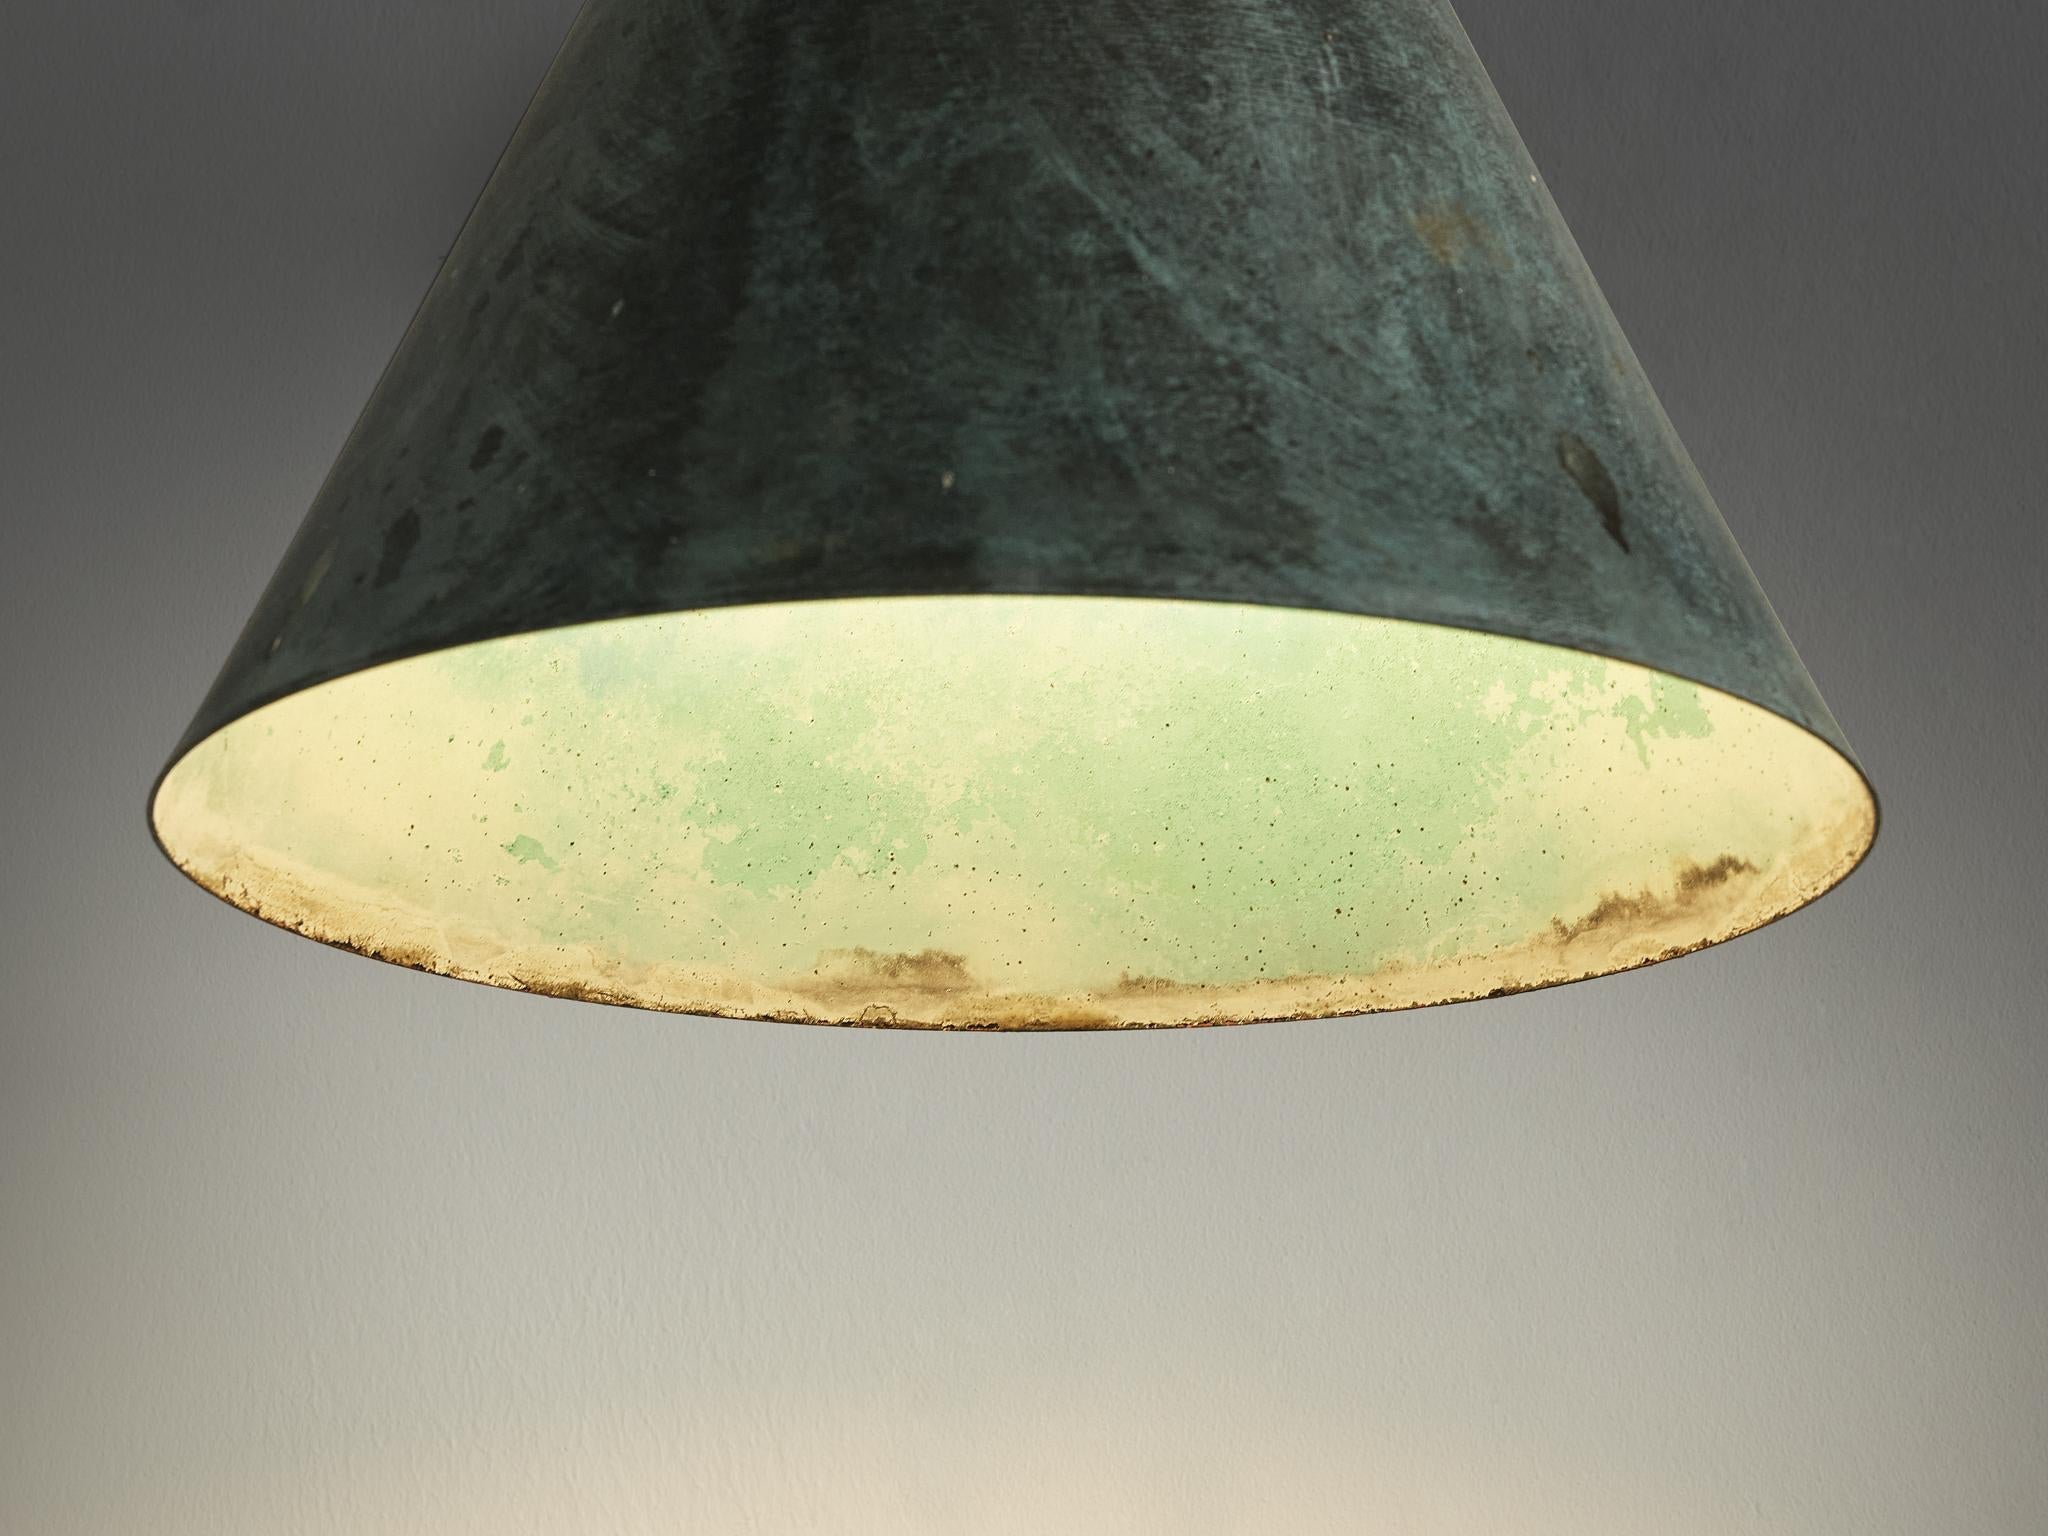 Hans-Agne Jakobsson 'Tratten' Wall Light in Patinated Copper